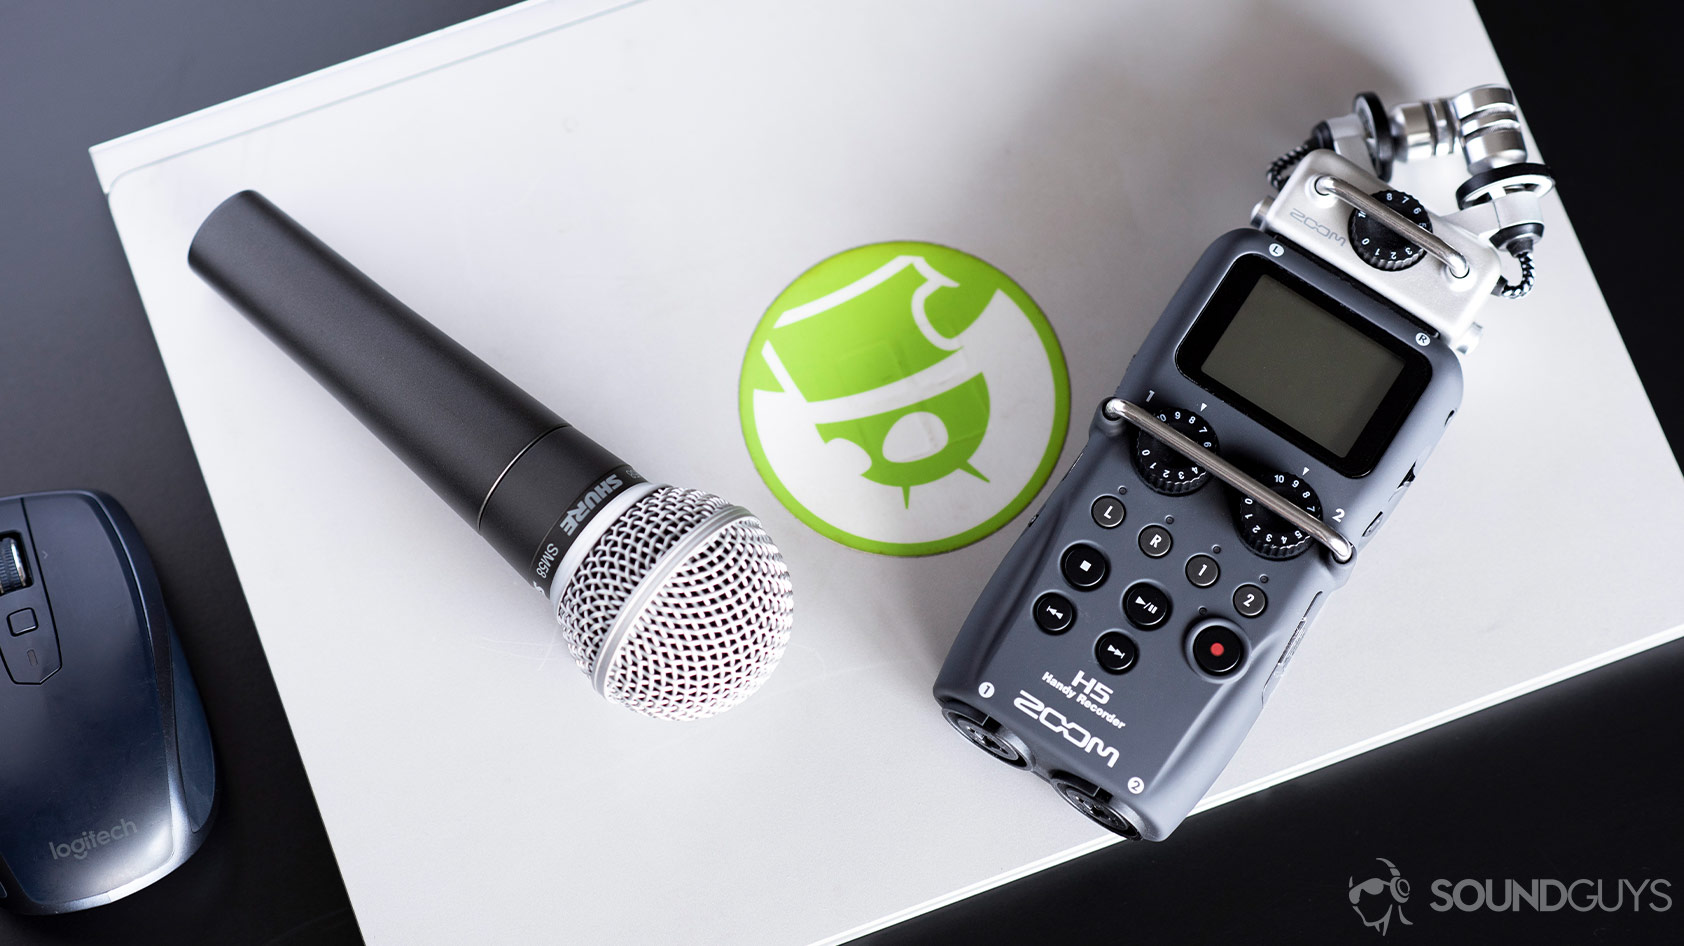 Shure SM58 microphone next to a Zoom H5 handheld voice recorder for field recording.